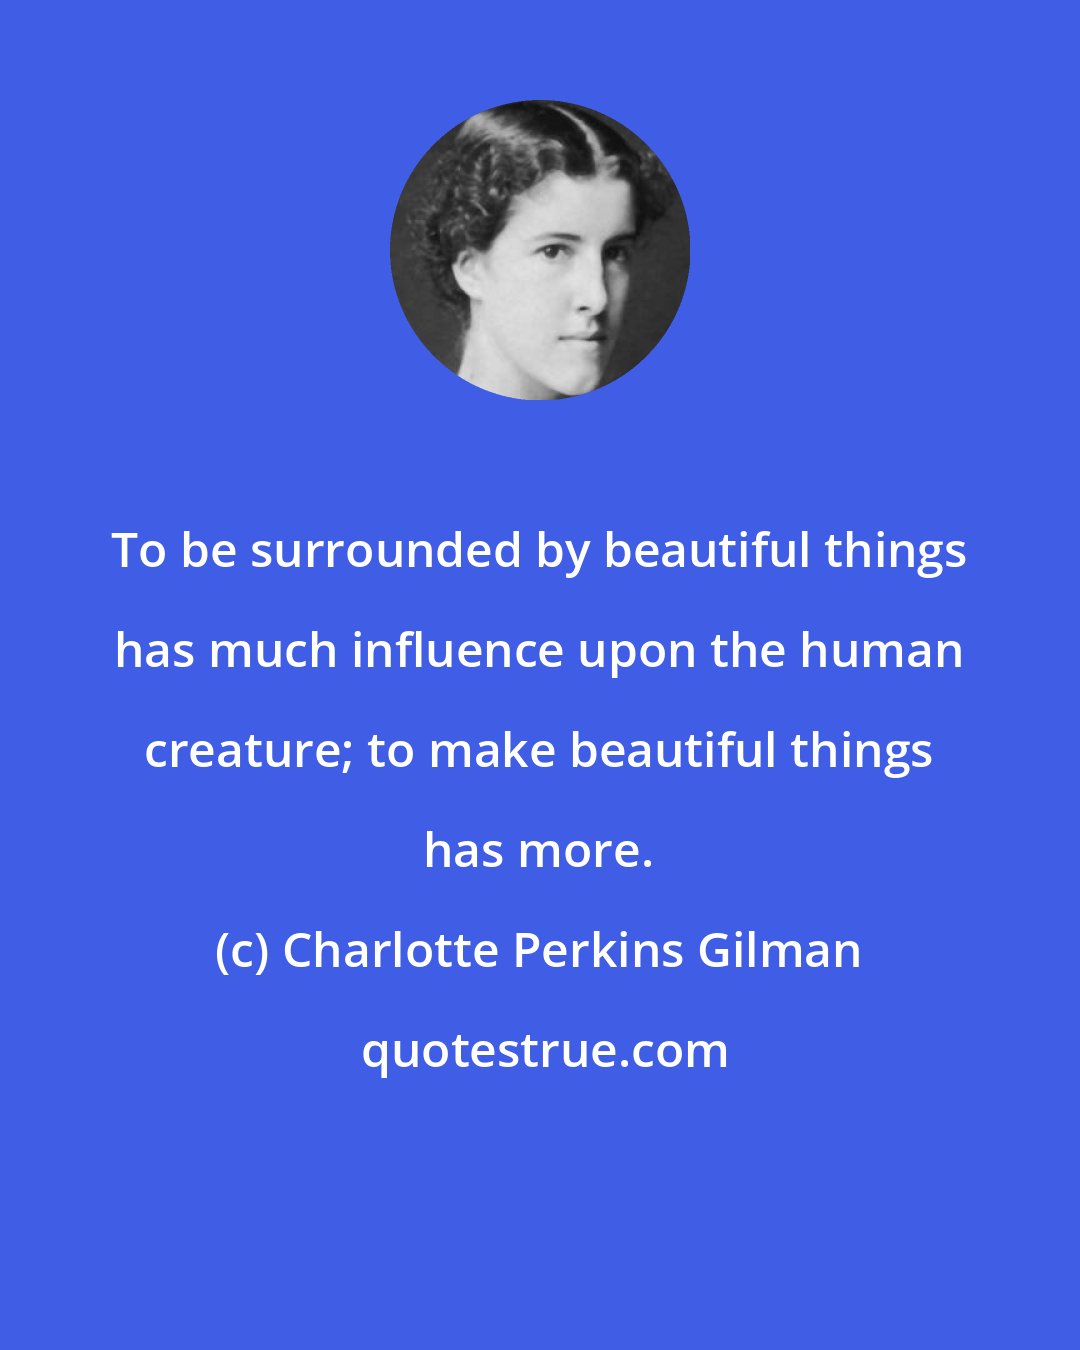 Charlotte Perkins Gilman: To be surrounded by beautiful things has much influence upon the human creature; to make beautiful things has more.